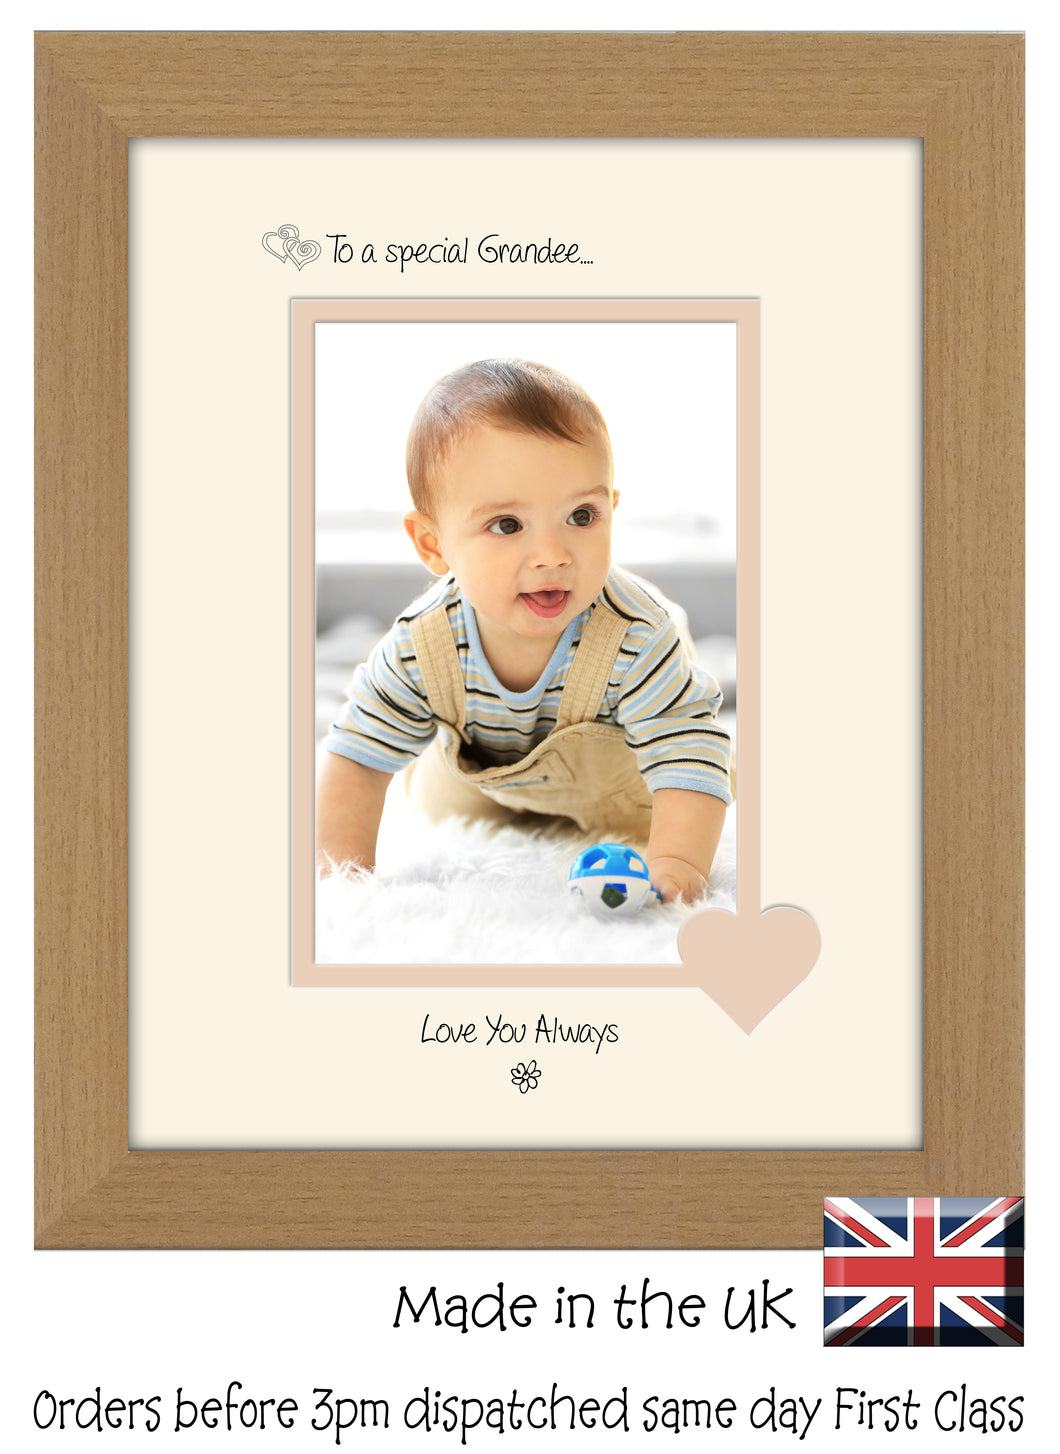 Grandee Photo Frame - To a Special Grandee ... Love you Always Portrait photo frame 6